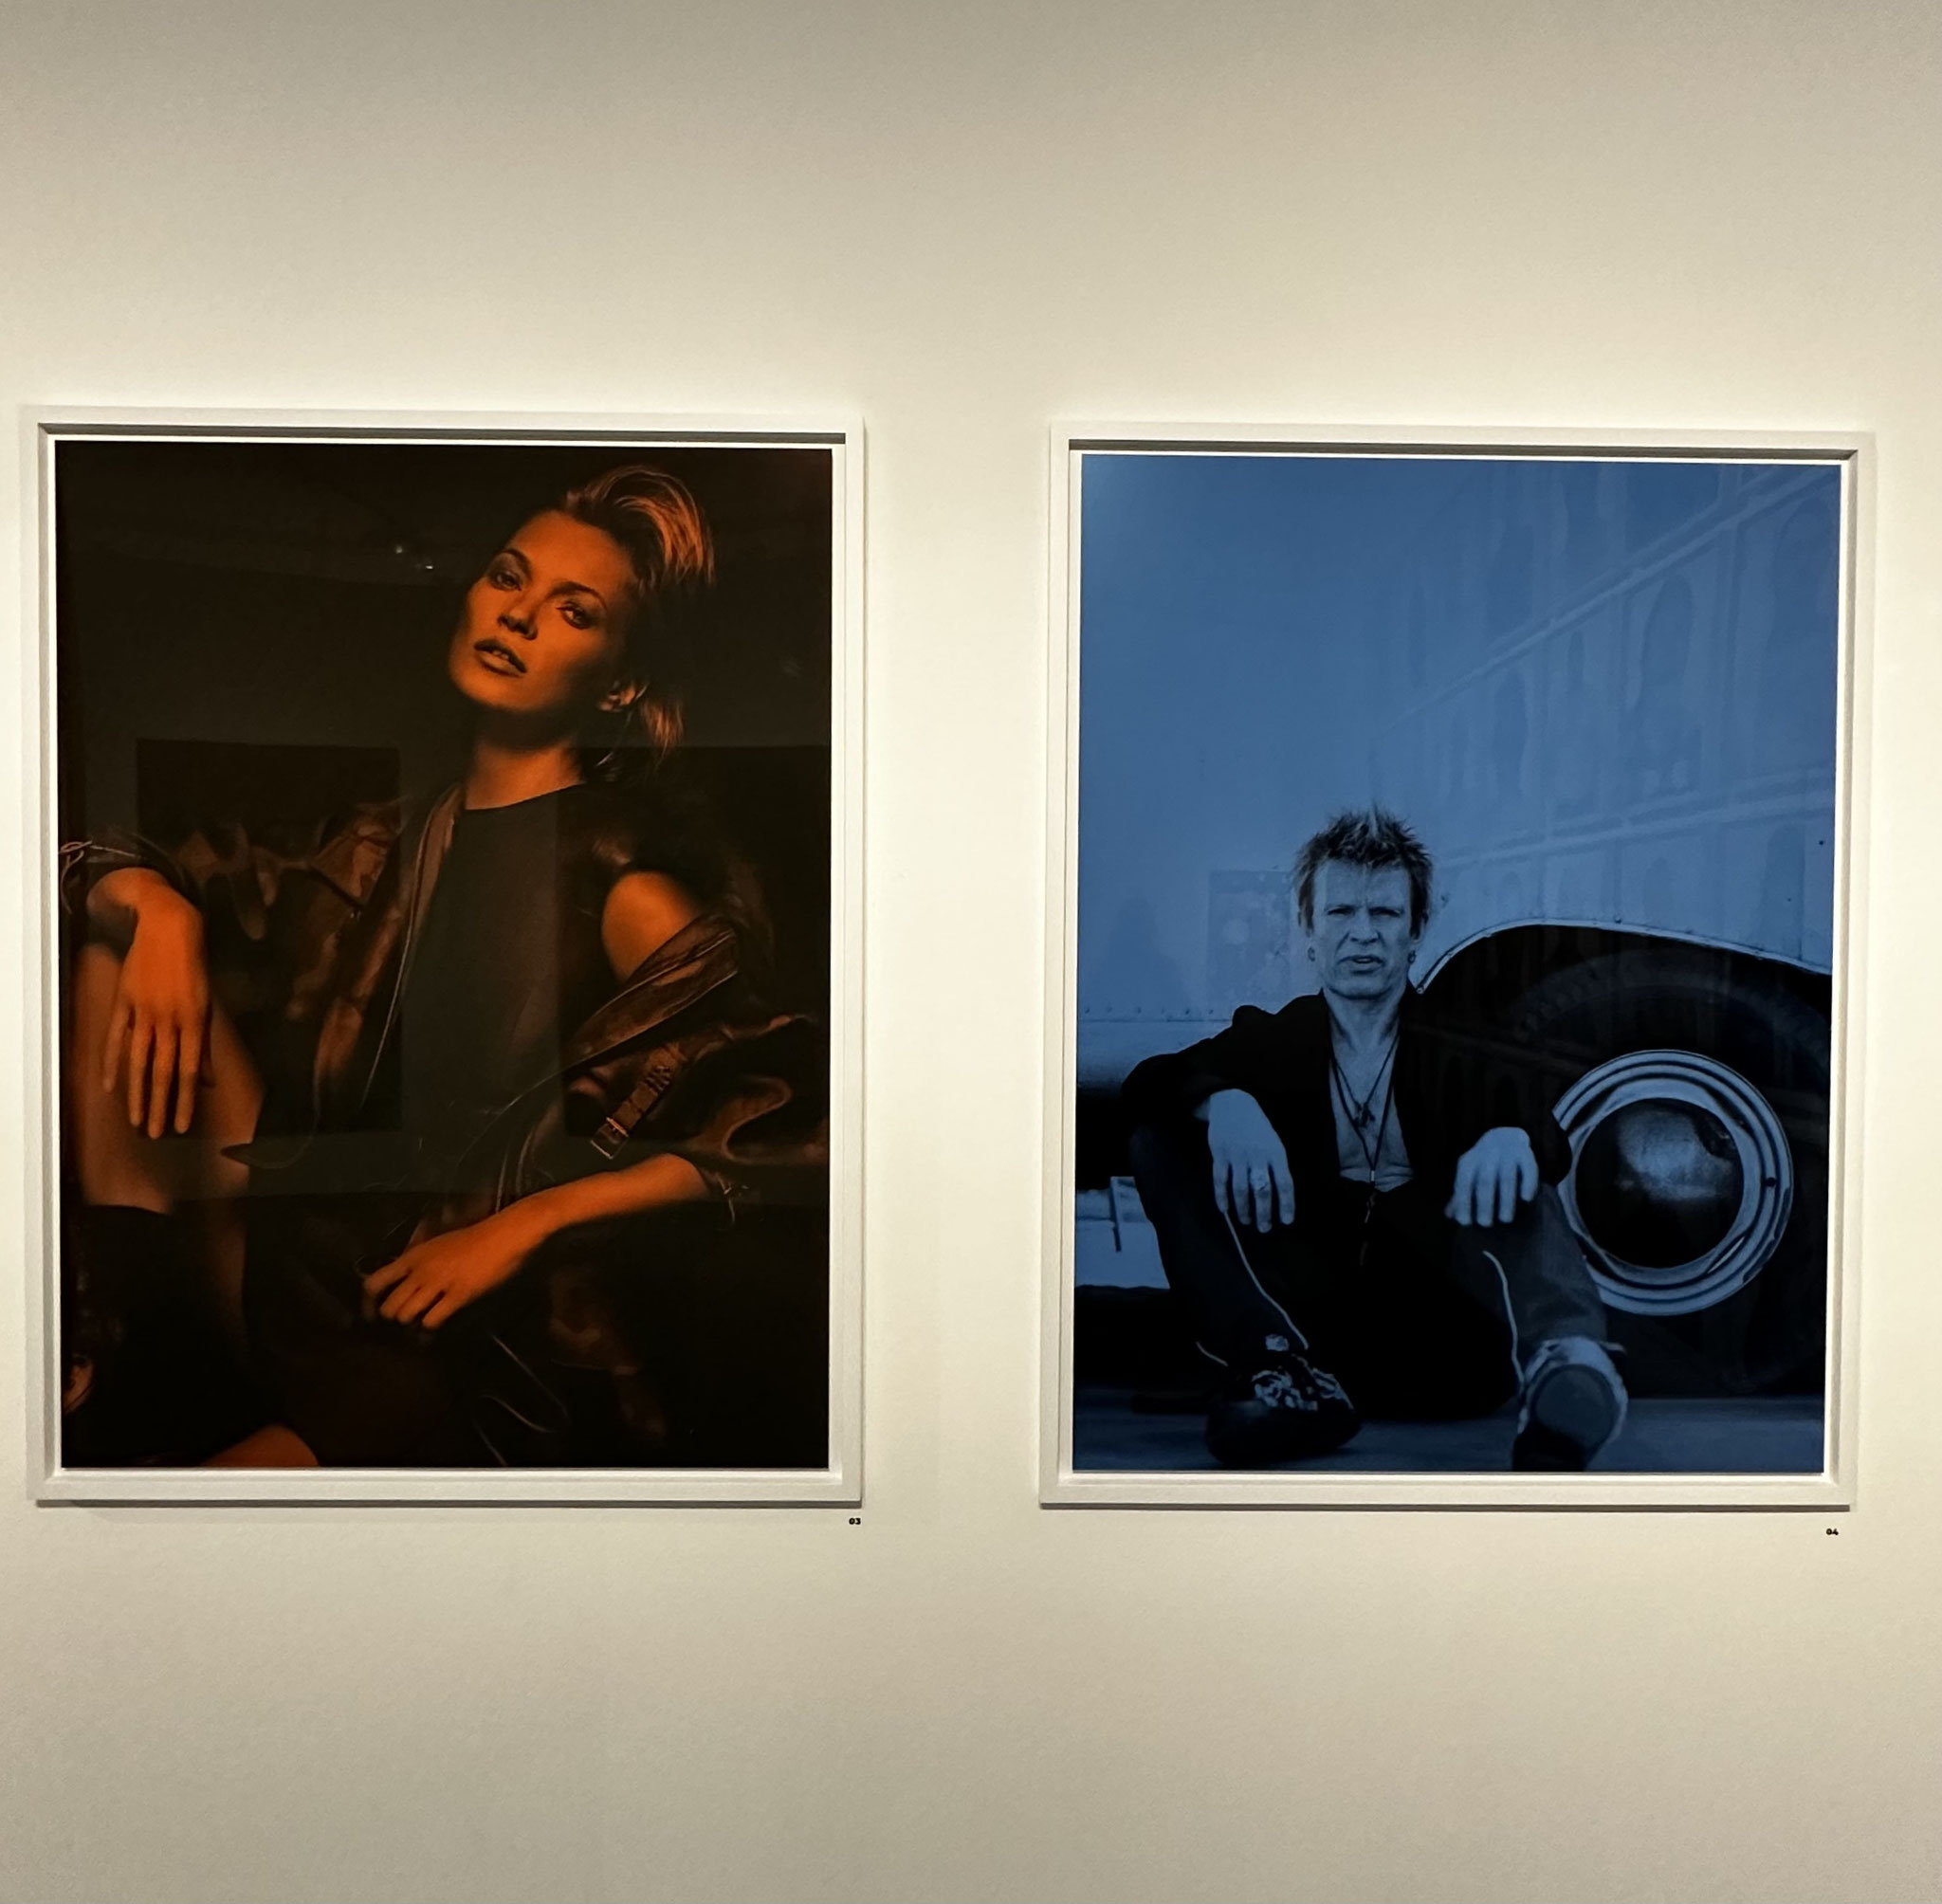 Bryan Adams: links: In Farbe, Kate Moss, Pose (London, 2013); rechts: In Farbe, Billy Idol, Backstage (L. A., 2008)